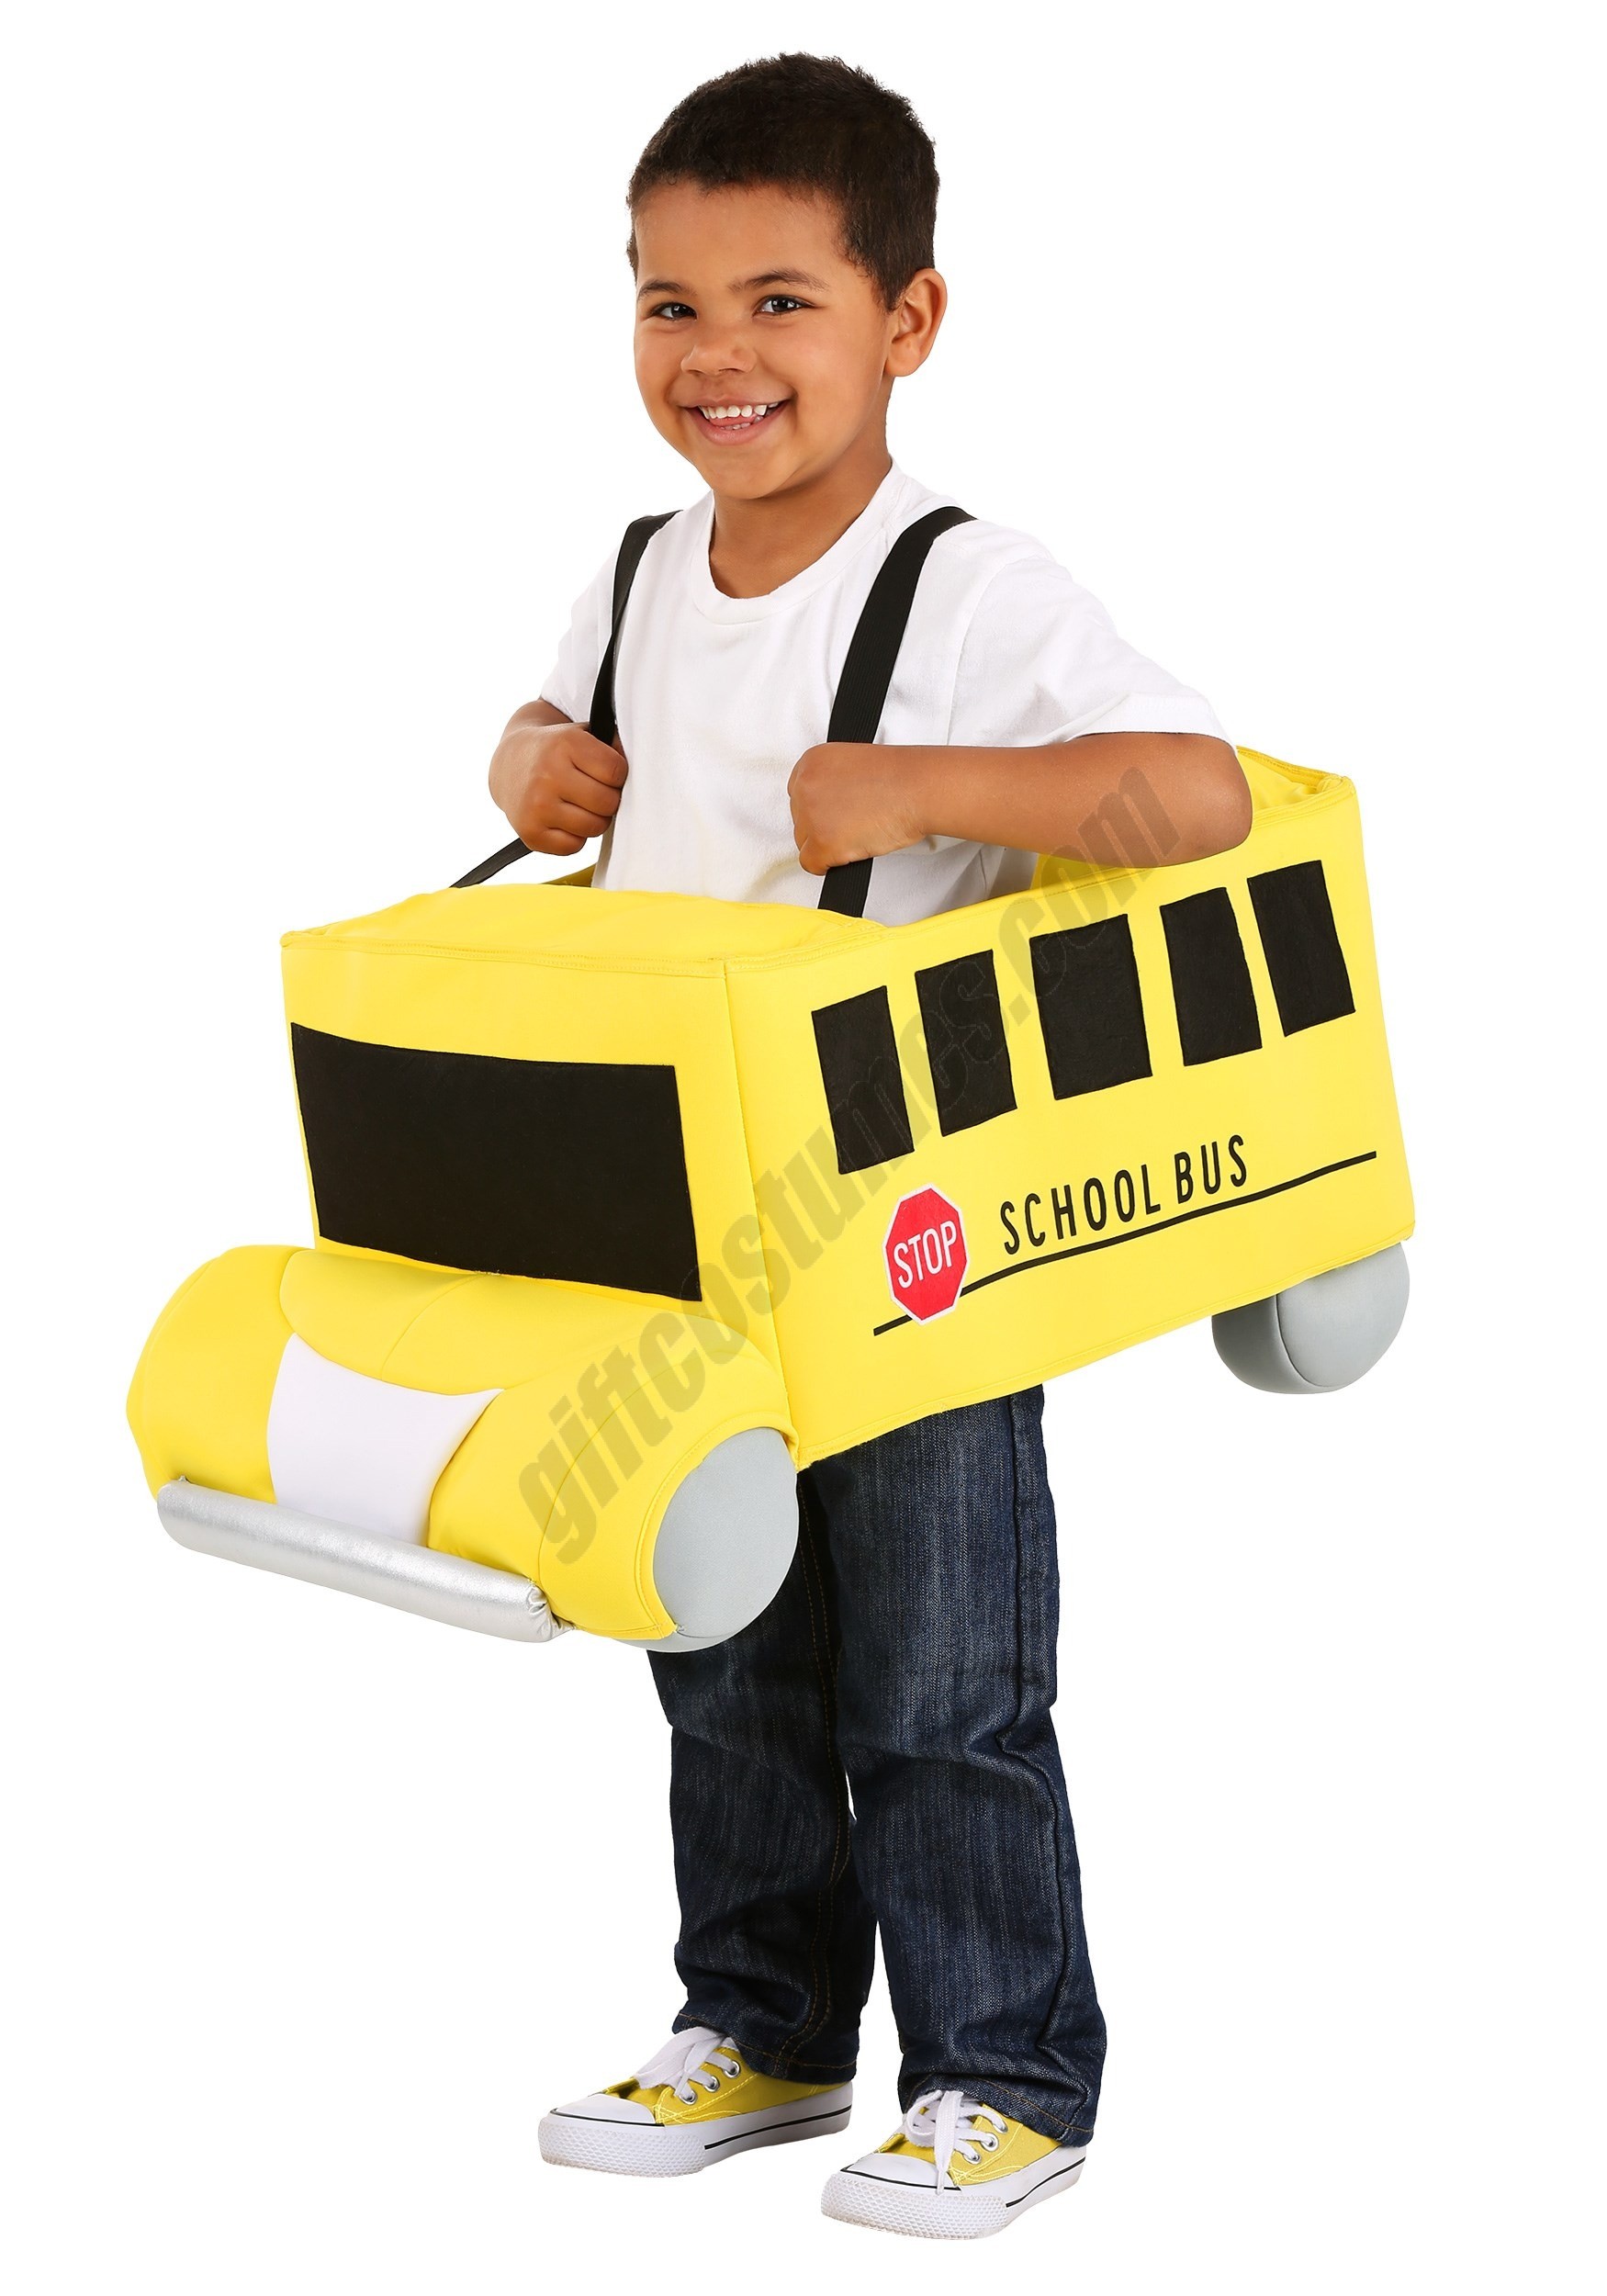 Ride in School Bus Costume for Toddlers Promotions - Ride in School Bus Costume for Toddlers Promotions